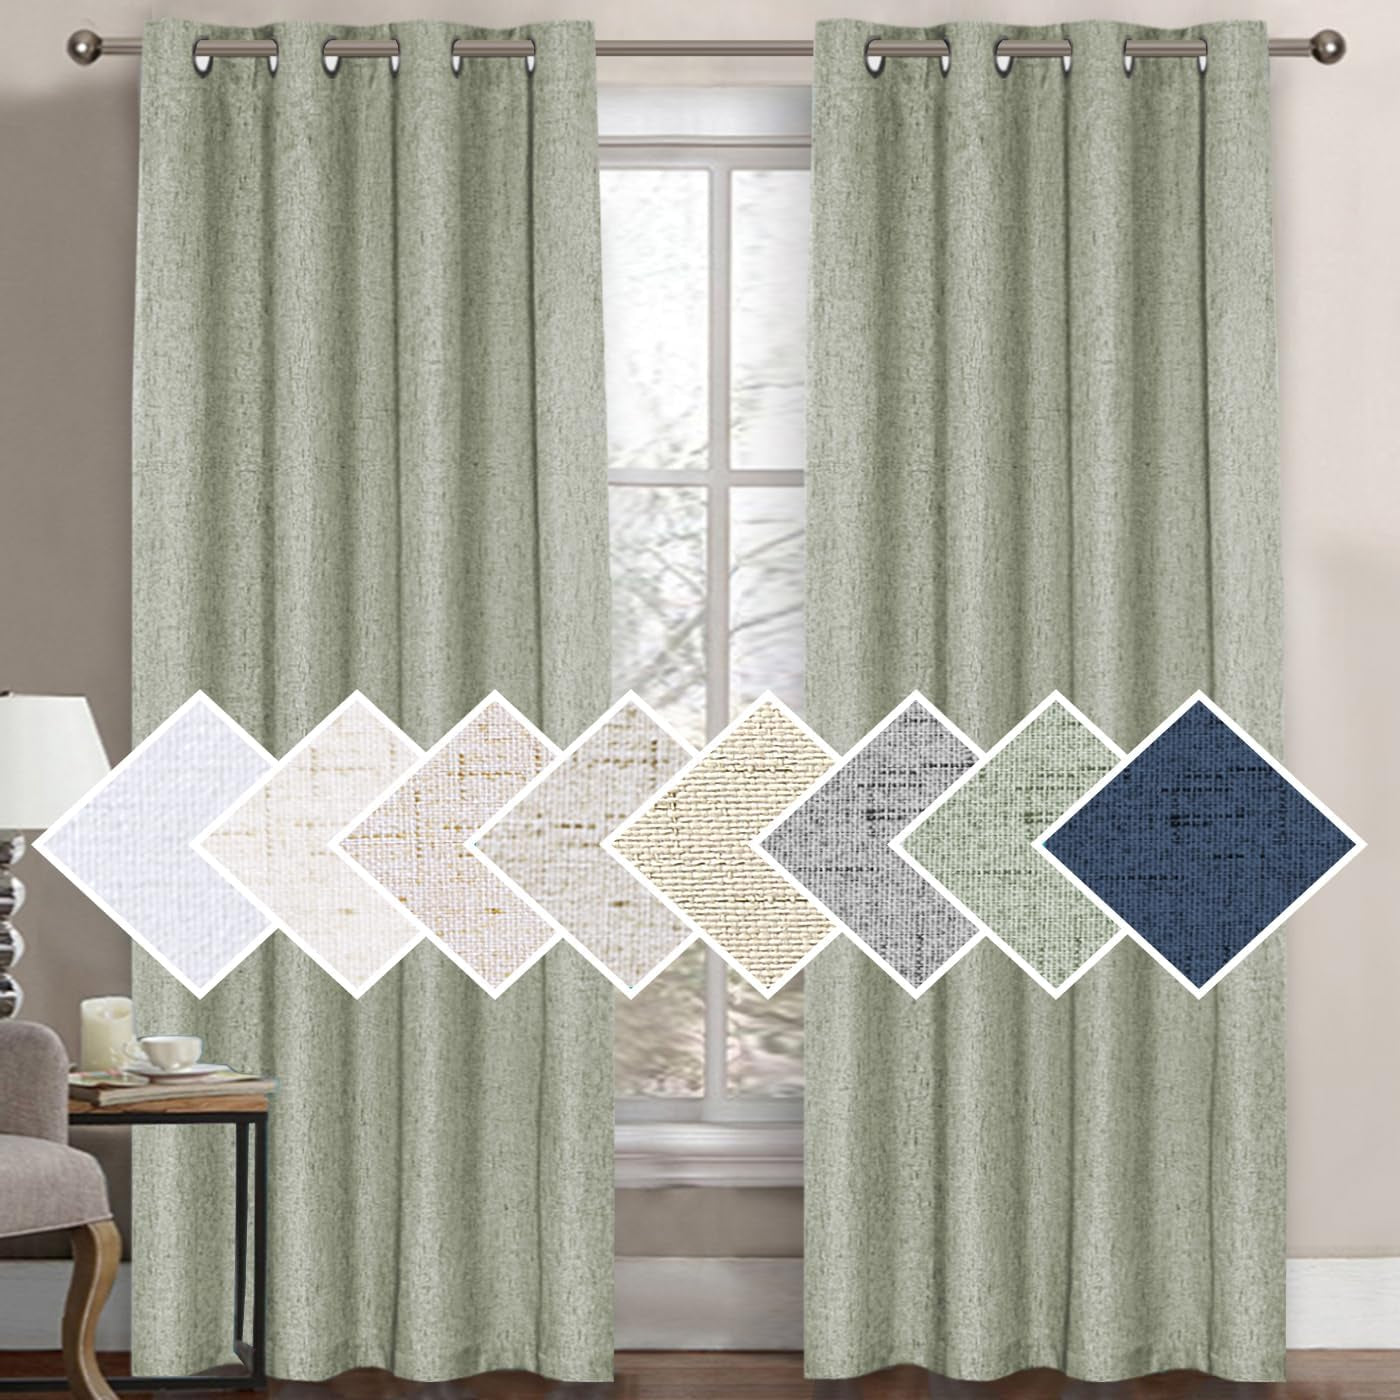 H.VERSAILTEX 100% Blackout Curtains for Bedroom Thermal Insulated Linen Textured Curtains Heat and Full Light Blocking Drapes Living Room Curtains 2 Panel Sets, 52X84 - Inch, Natural  H.VERSAILTEX Sage 1 Panel - 52"W X 96"L 